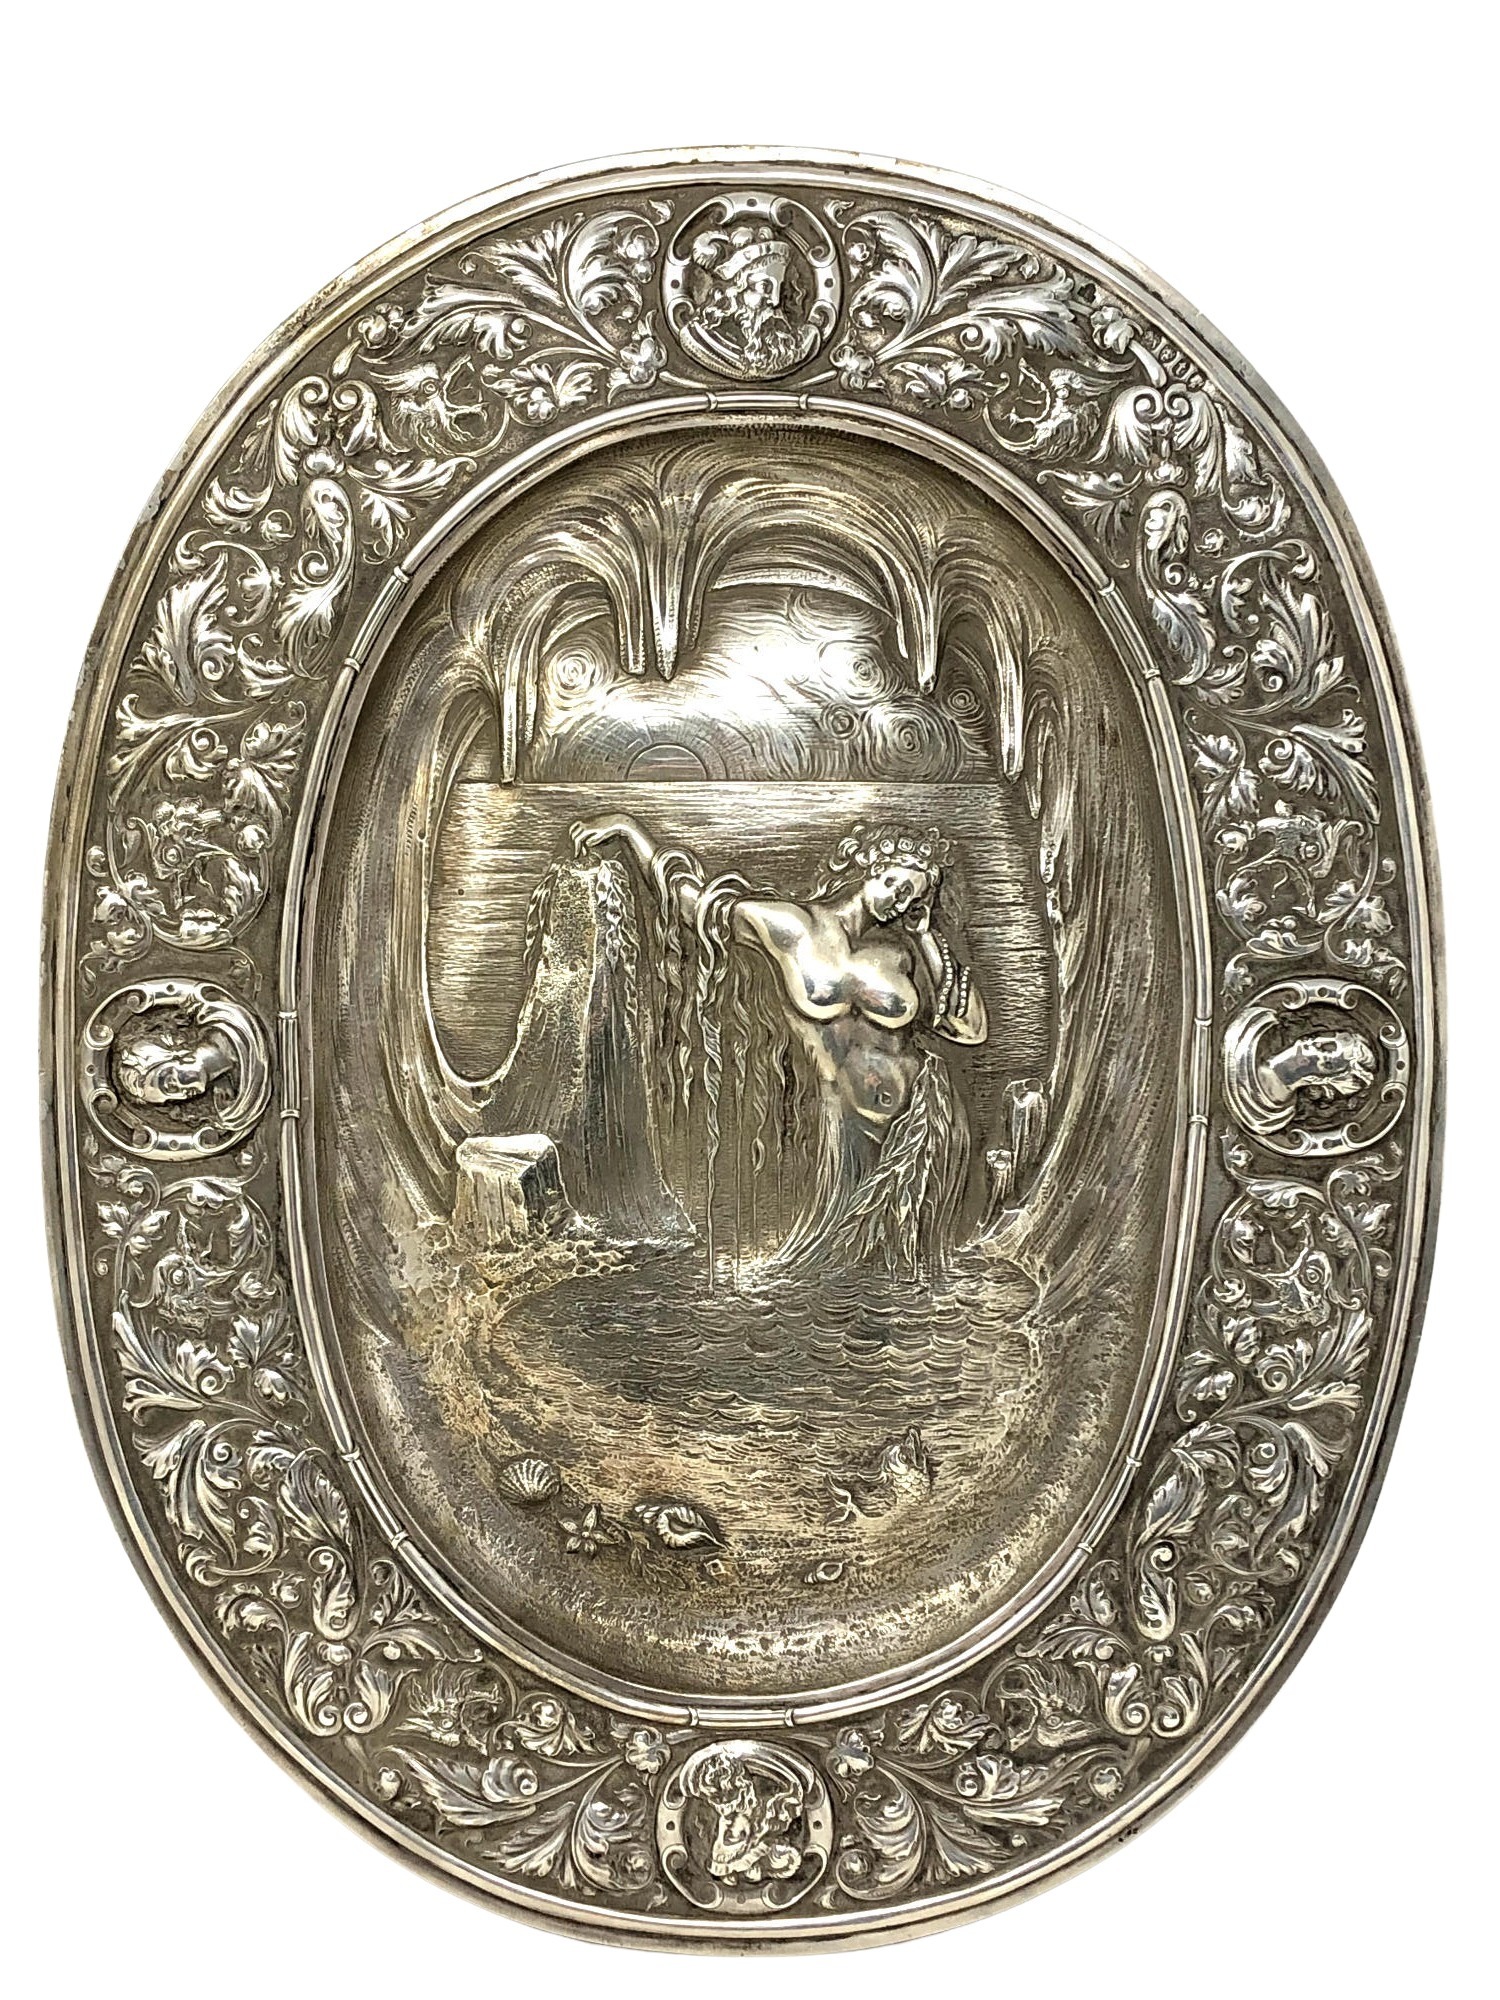 A fine Victorian silver plaque depicting a scene from mythology by Francis Boone Thomas, 32 oz.